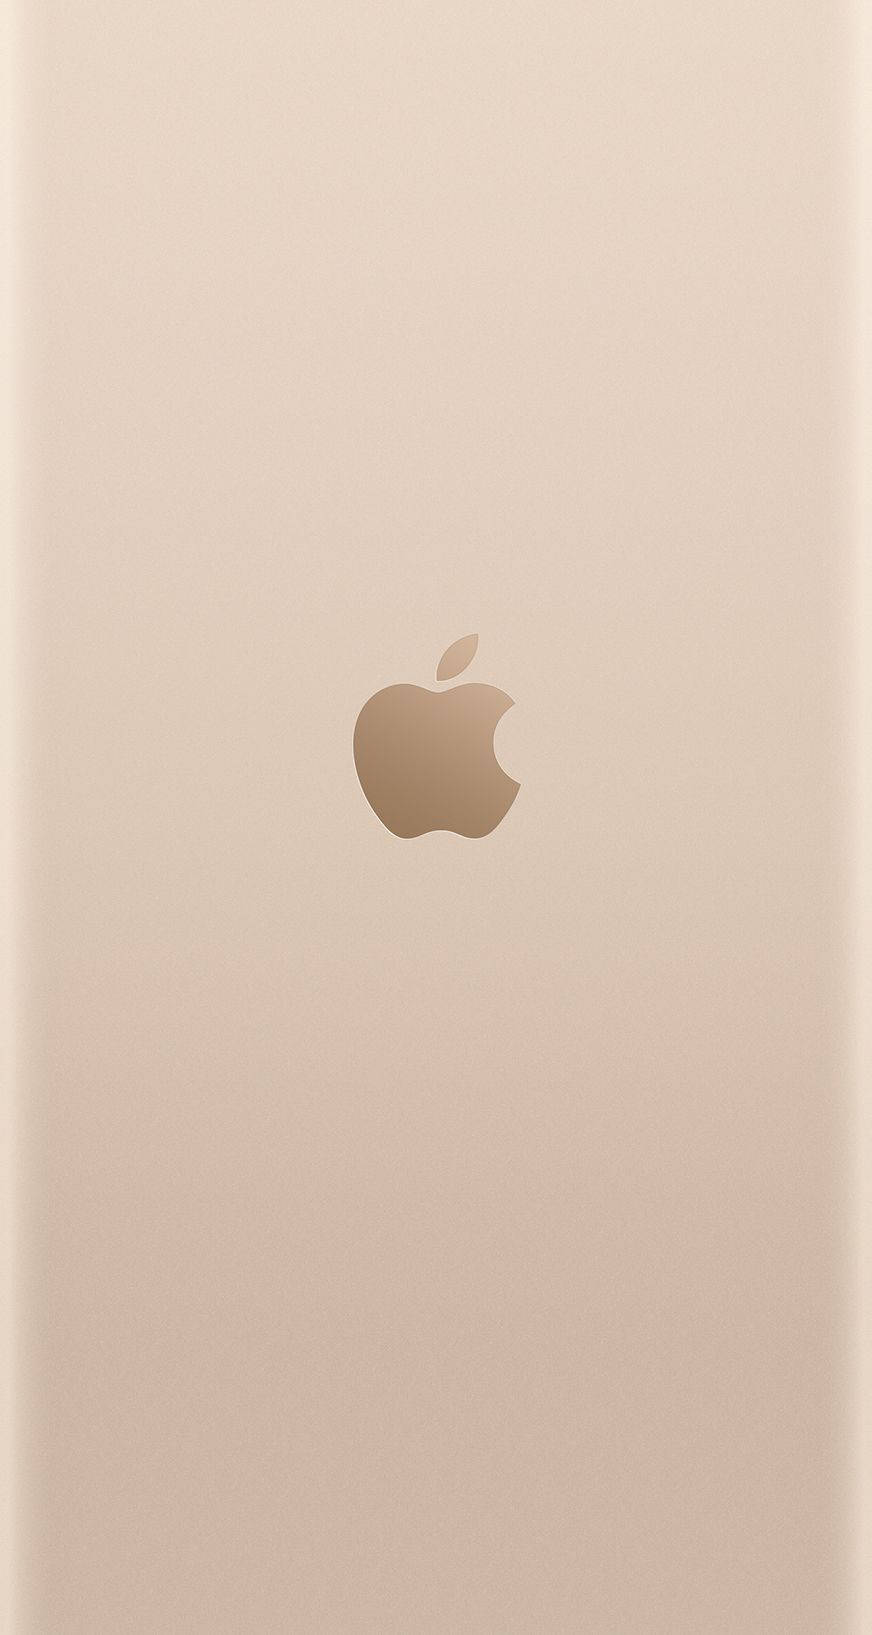 An image of an Apple iphone 6s Gold Wallpaper